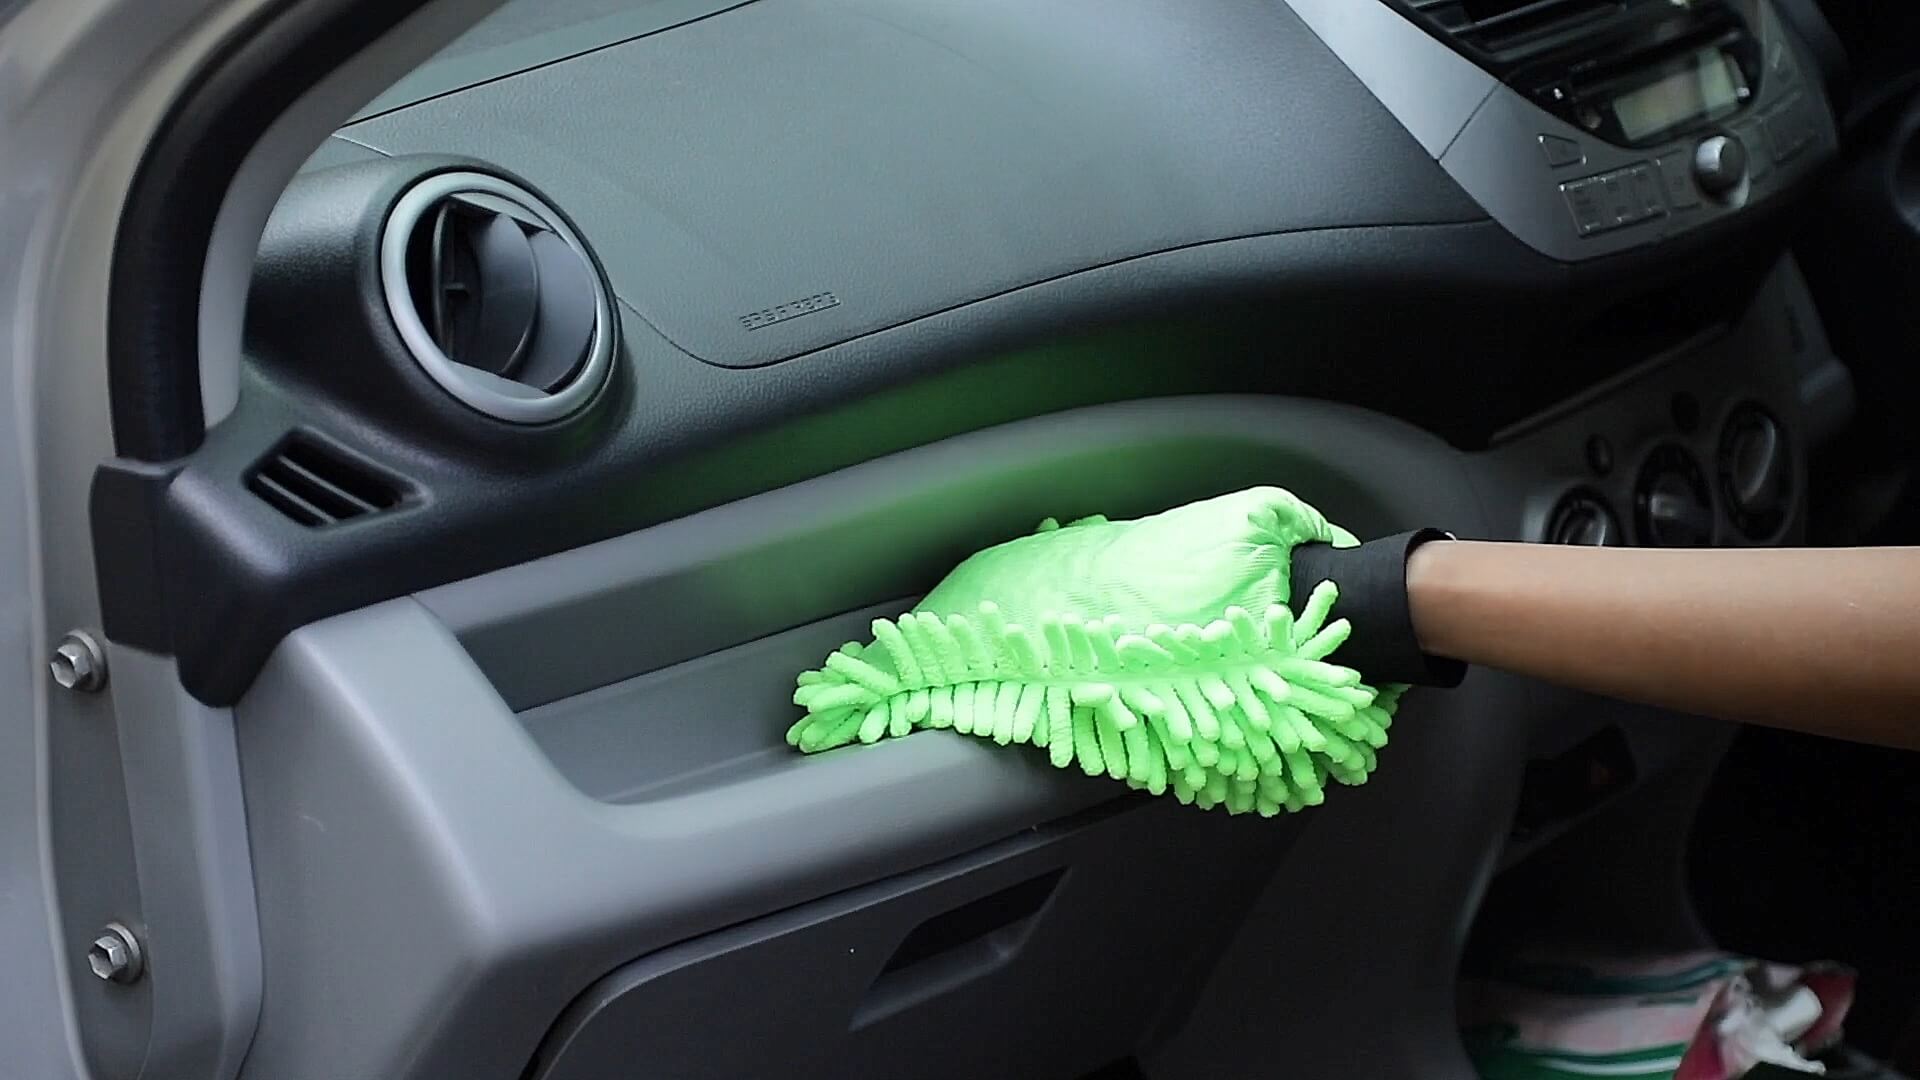 FIAT presents the Sanitizing Glove Box with two online videos: sanitizing  small items has never been so simple and smart, Fiat